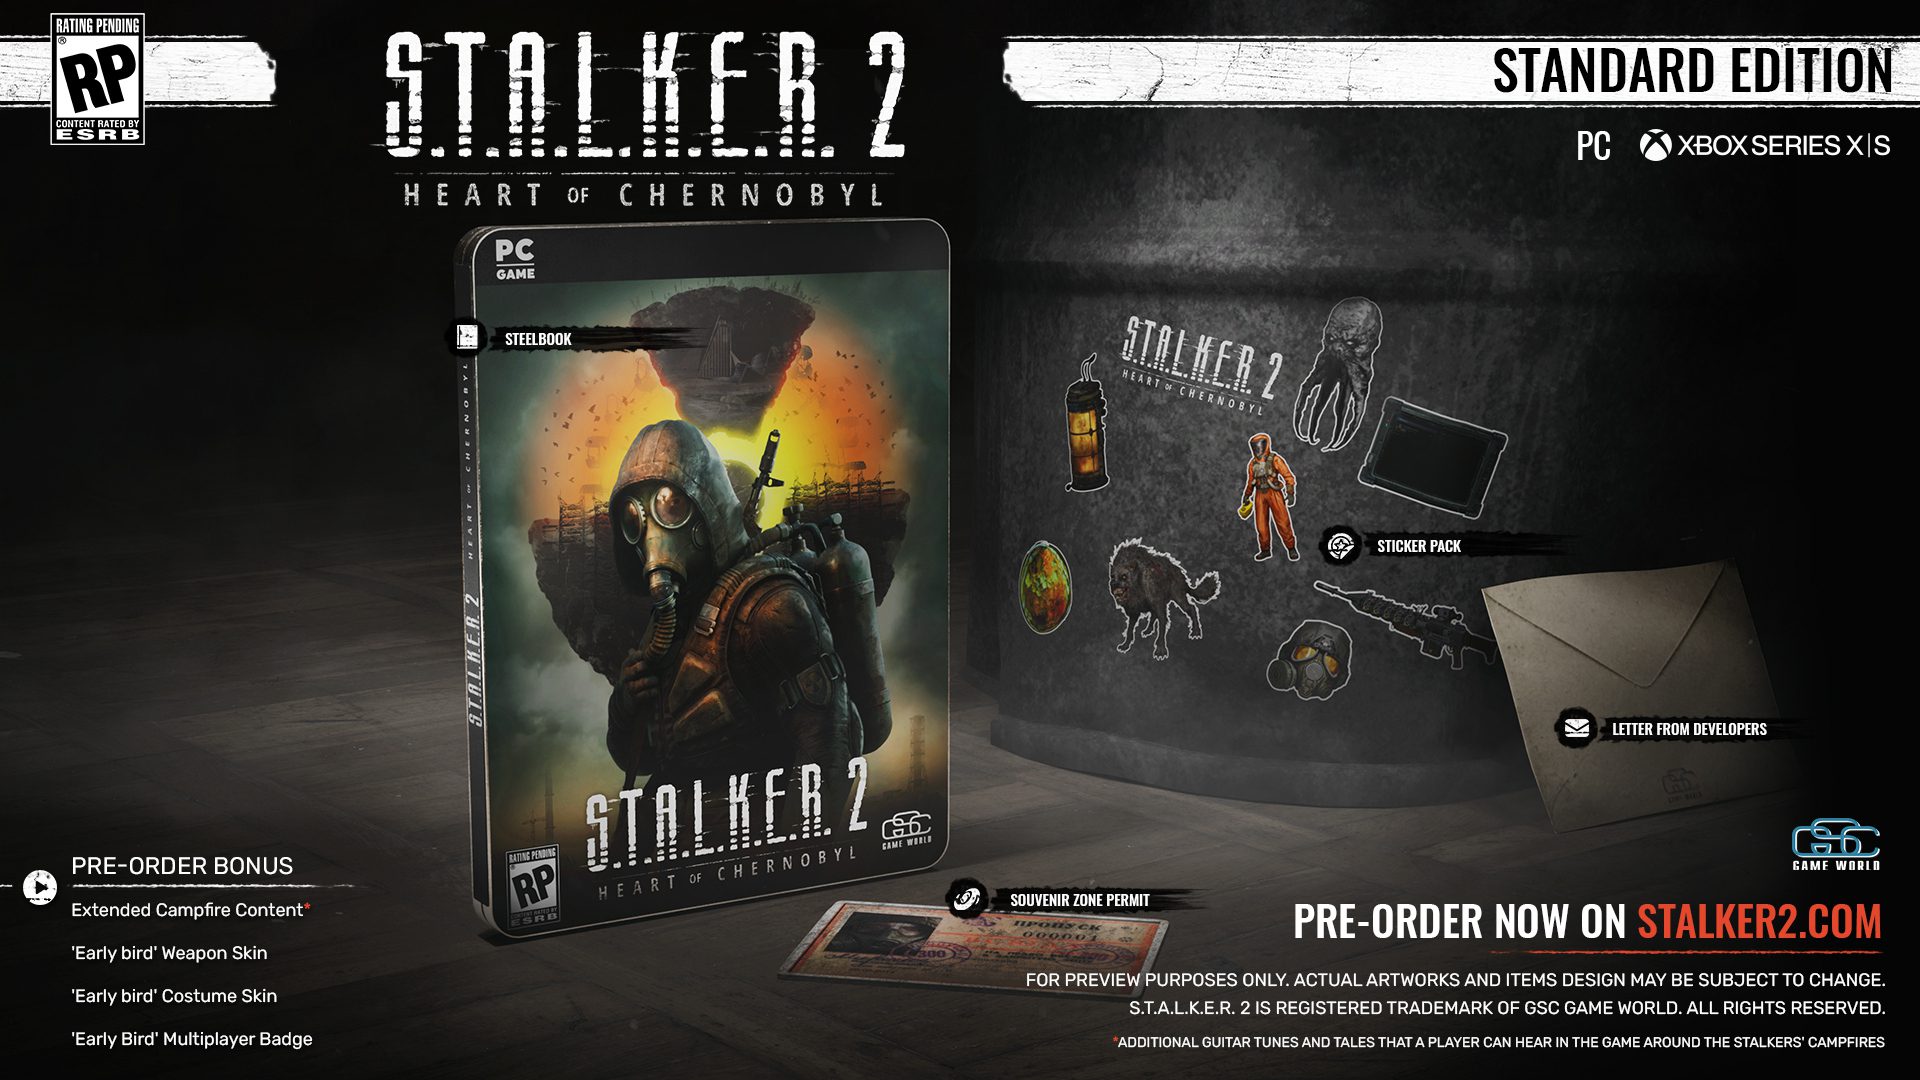 S.T.A.L.K.E.R. 2 Standard Edition & Limited Edition